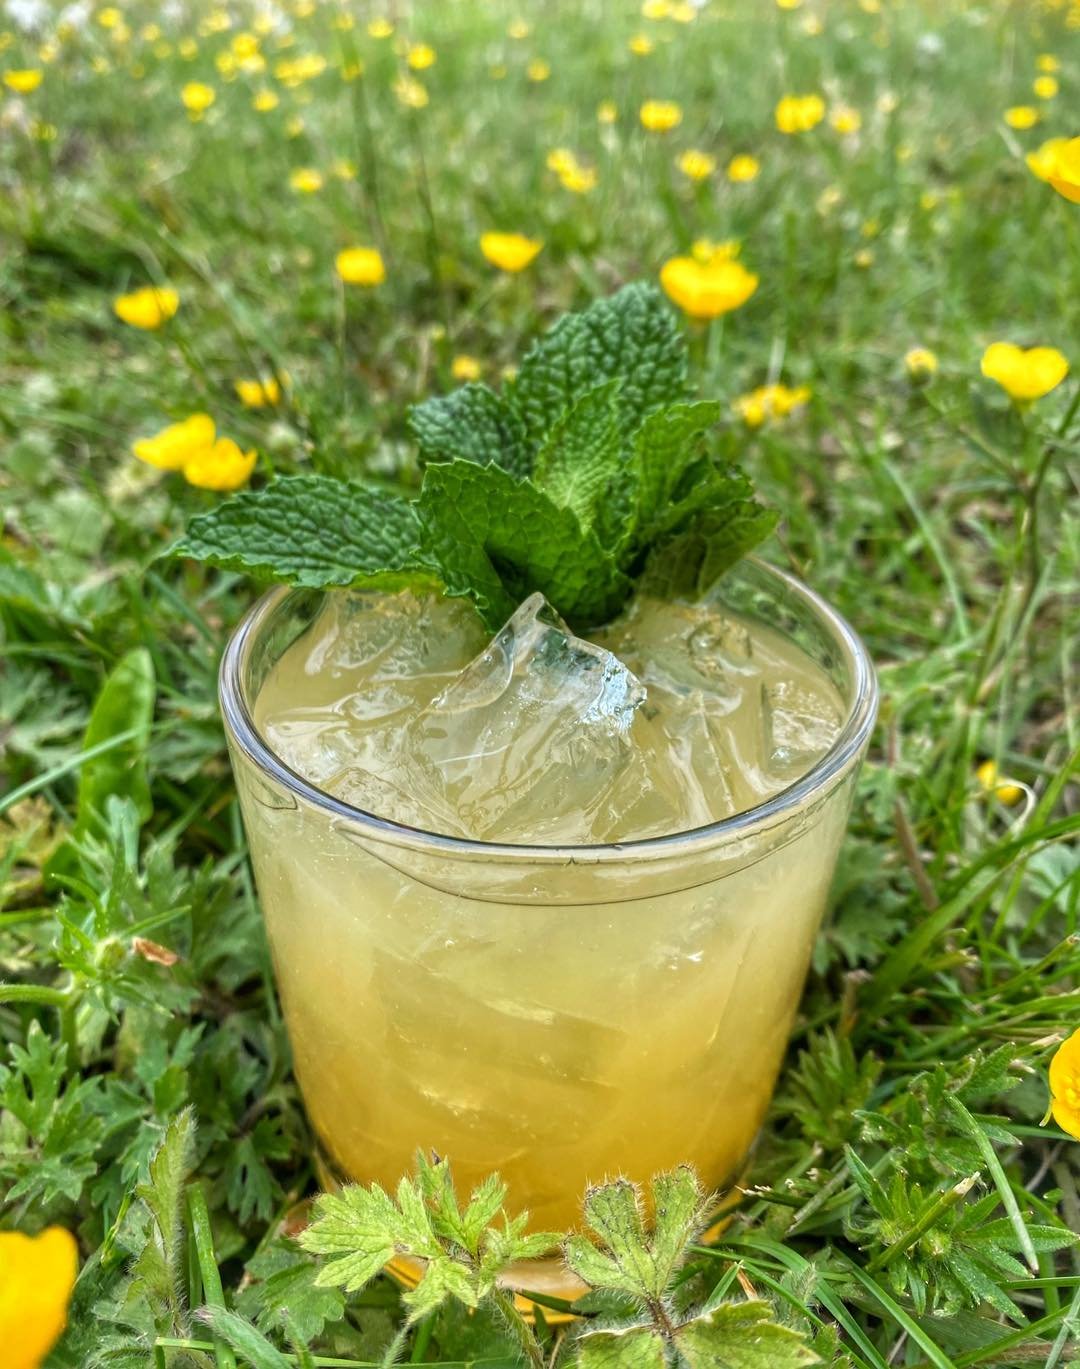 ☀️ Here Comes the Sun Margarita ☀️ 

Our latest Spring cocktail is now here!  Espol&oacute;n Blanco Tequila, Blood Orange liqueur, Chinola Passionfruit liqueur, fresh sour mix, house mint syrup, tiki bitters

#margarita #springcocktails #tequila